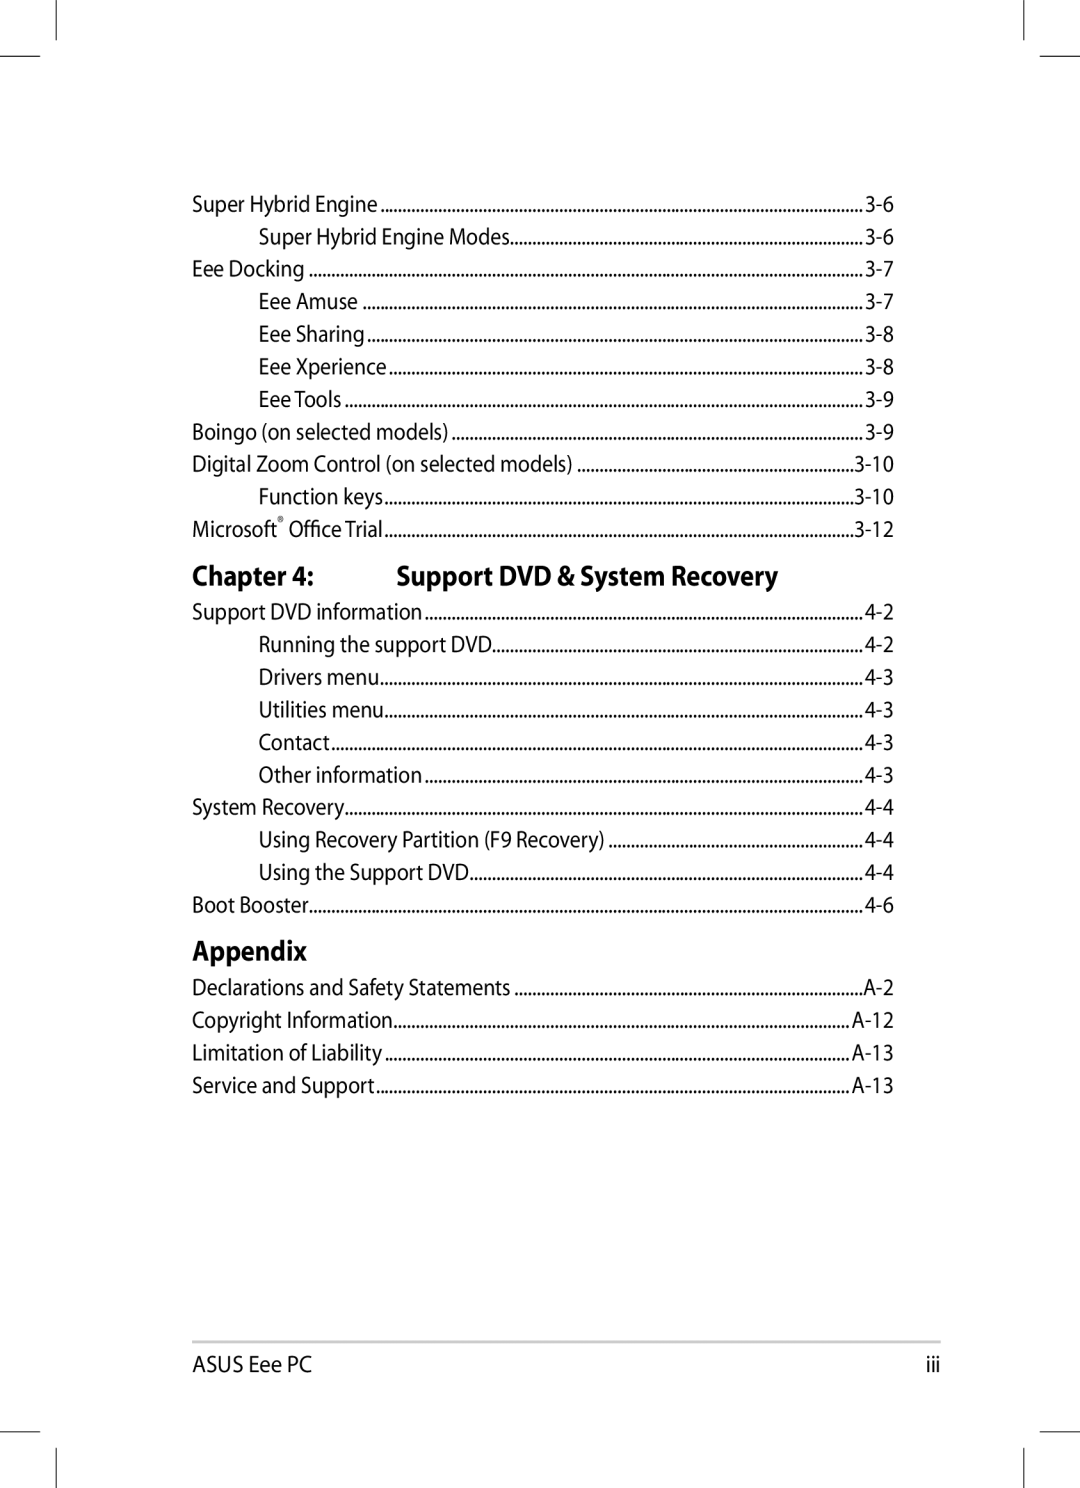 Asus 1008P-KR-PU27-PI user manual Chapter, Support DVD & System Recovery 